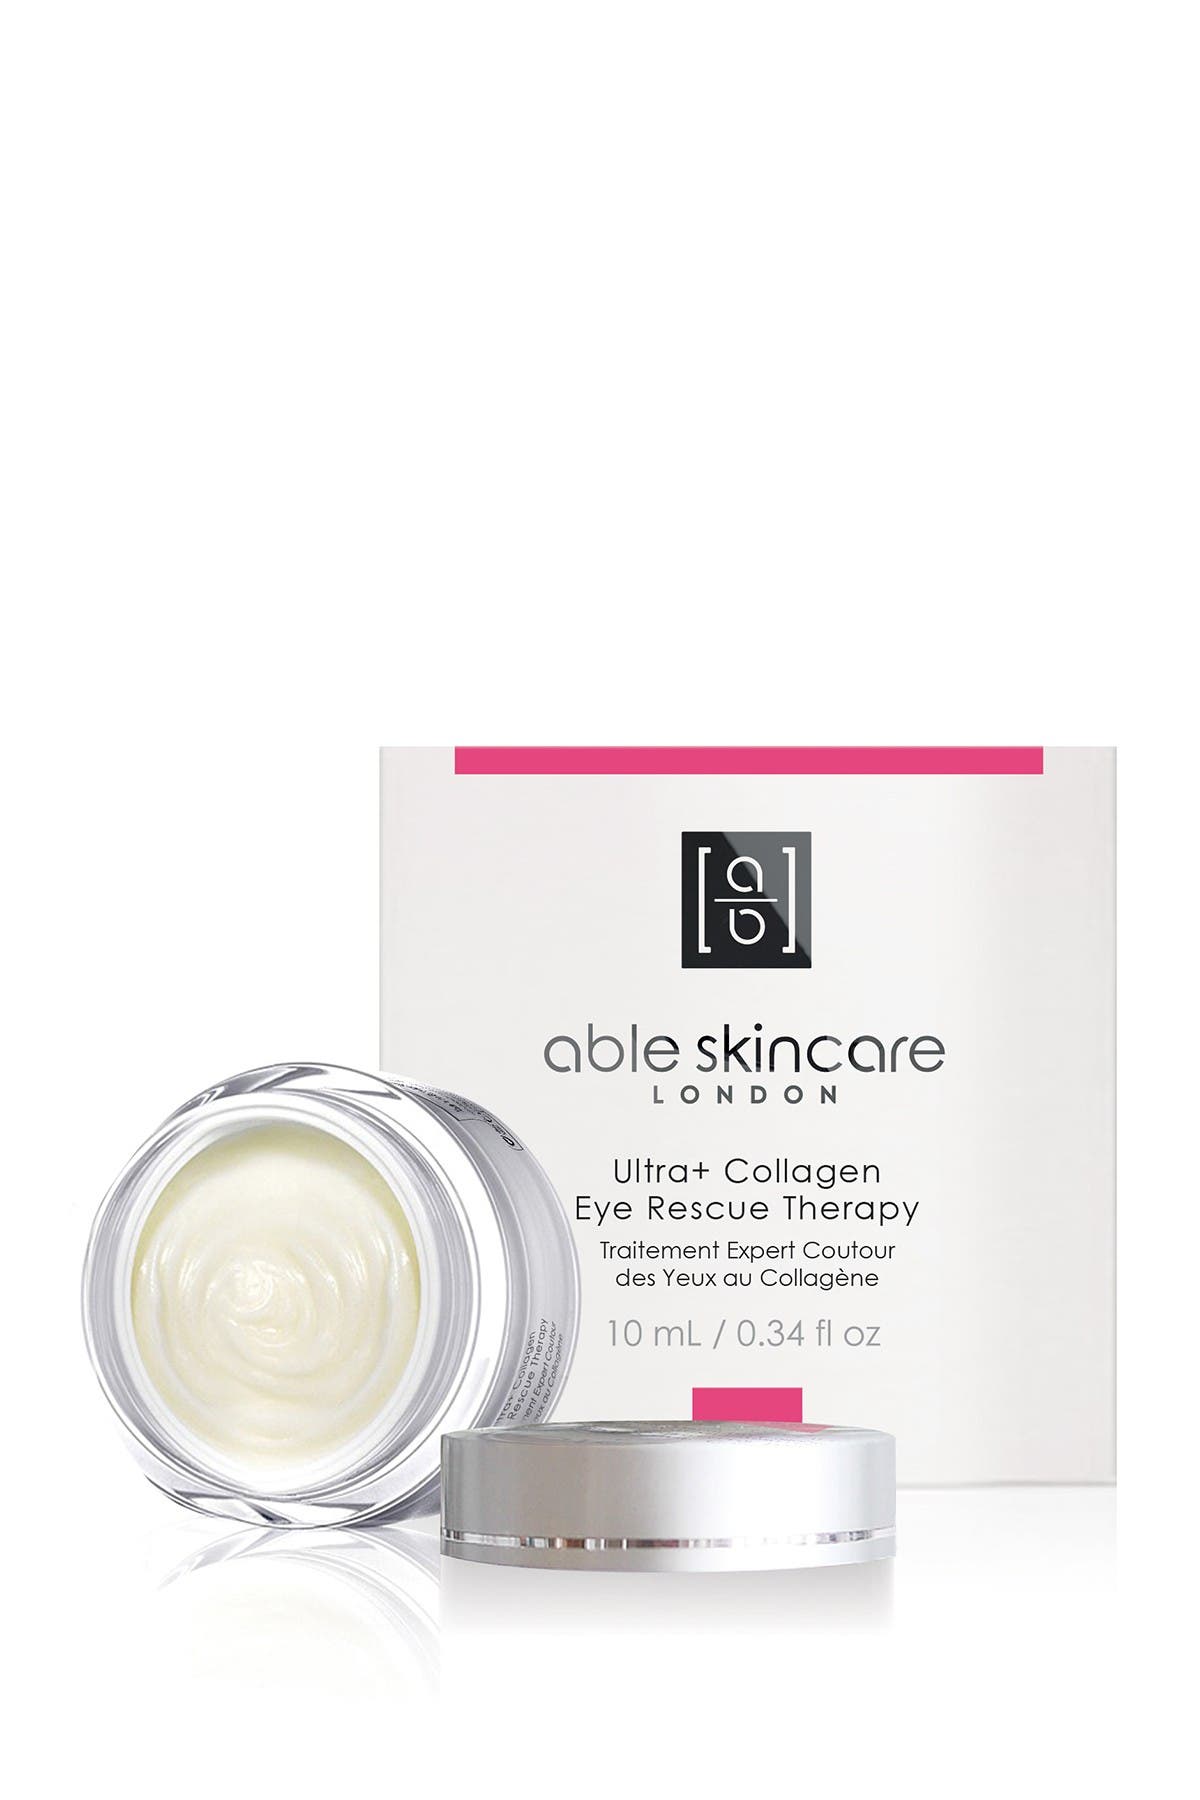 Able Skincare Ultra+ Collagen Eye Rescue Therapy